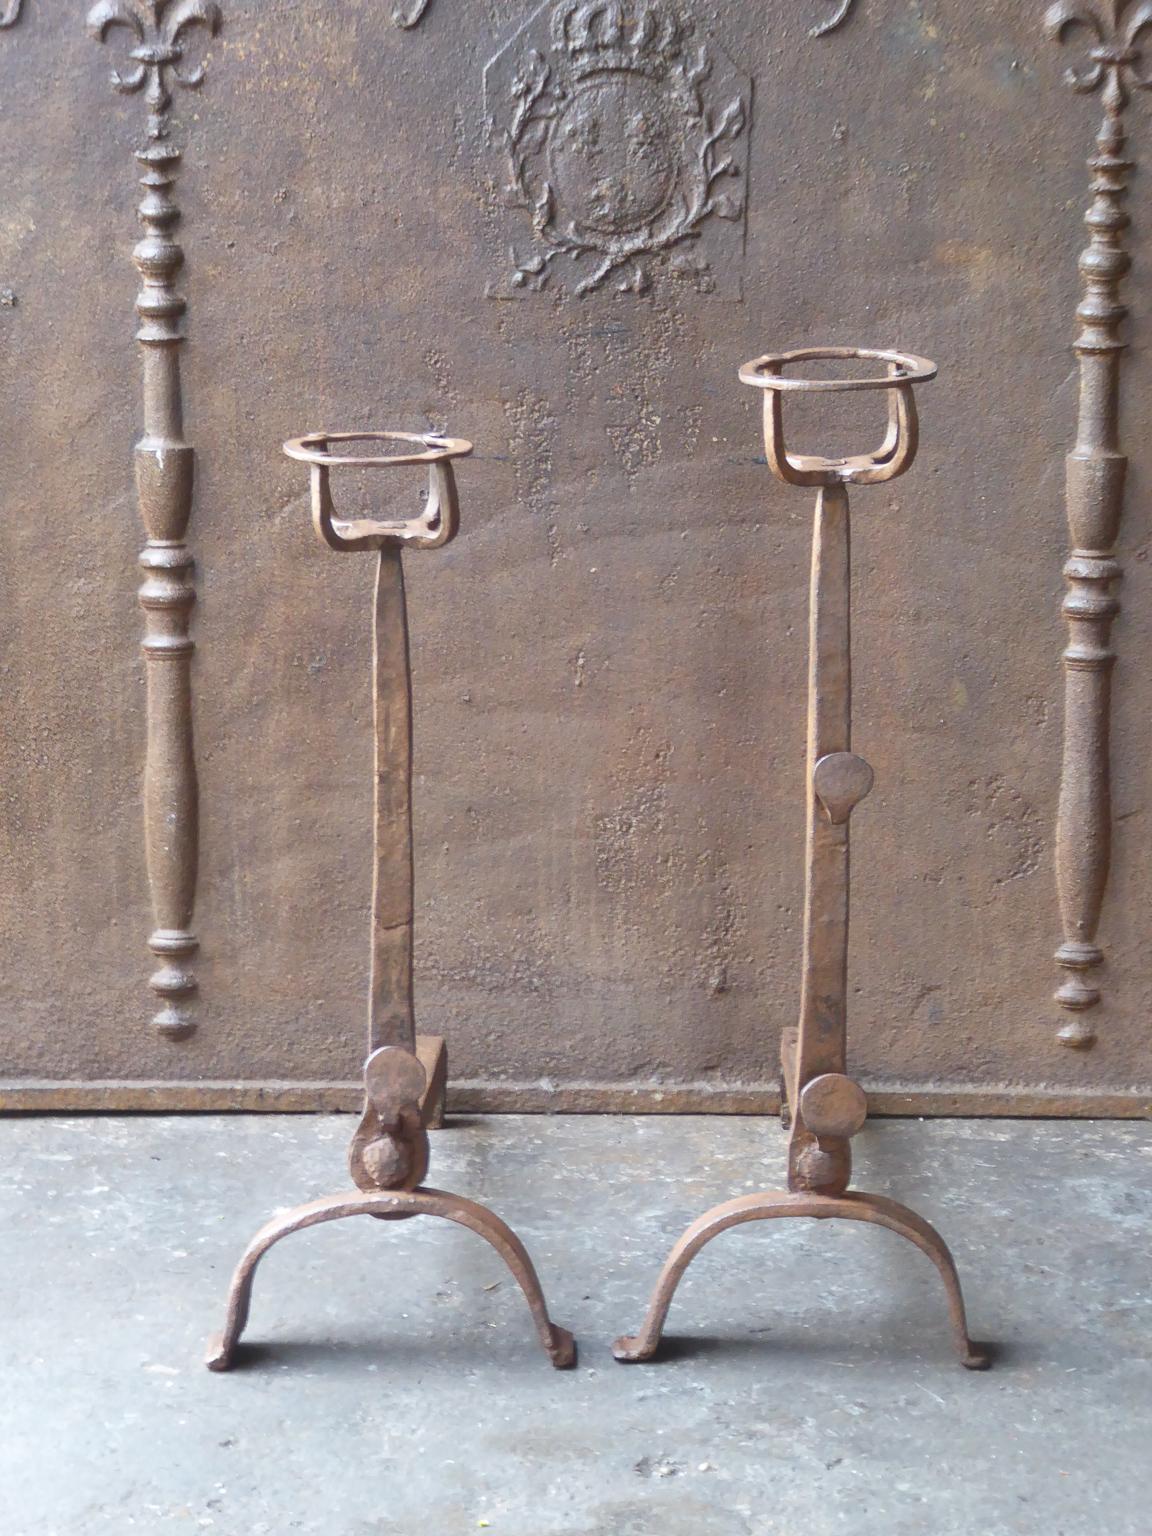 17th-18th century French andirons made of wrought iron. The style of the andirons is gothic. The andirons have spit hooks to grill food. They have a natural brown patina. Upon request it can be made black.